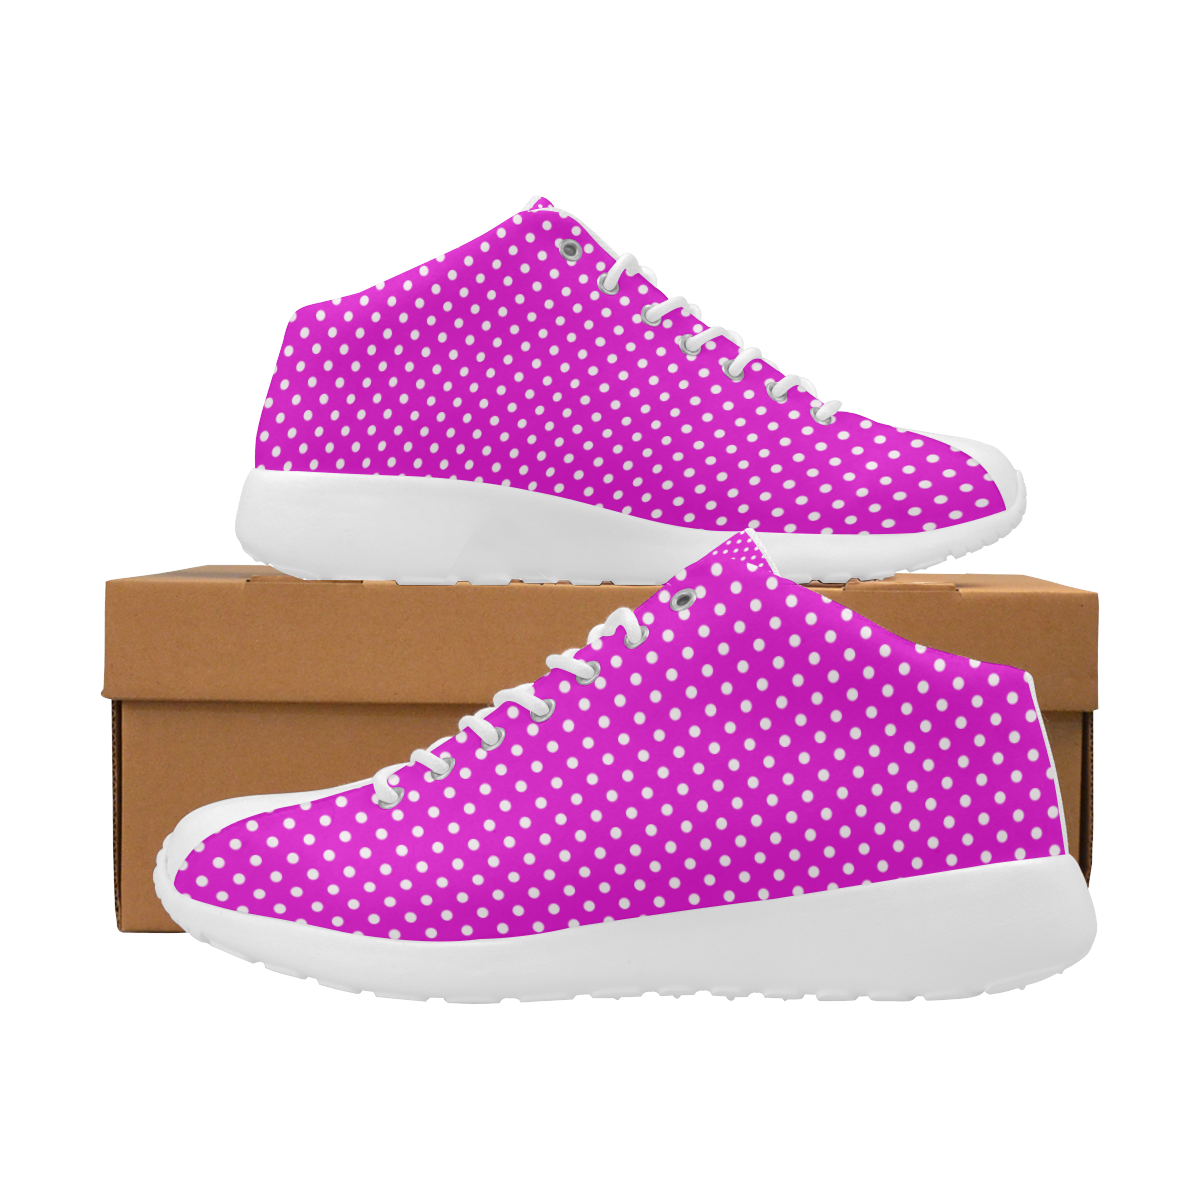 Pink polka dots Women's Basketball Training Shoes/Large Size (Model 47502)